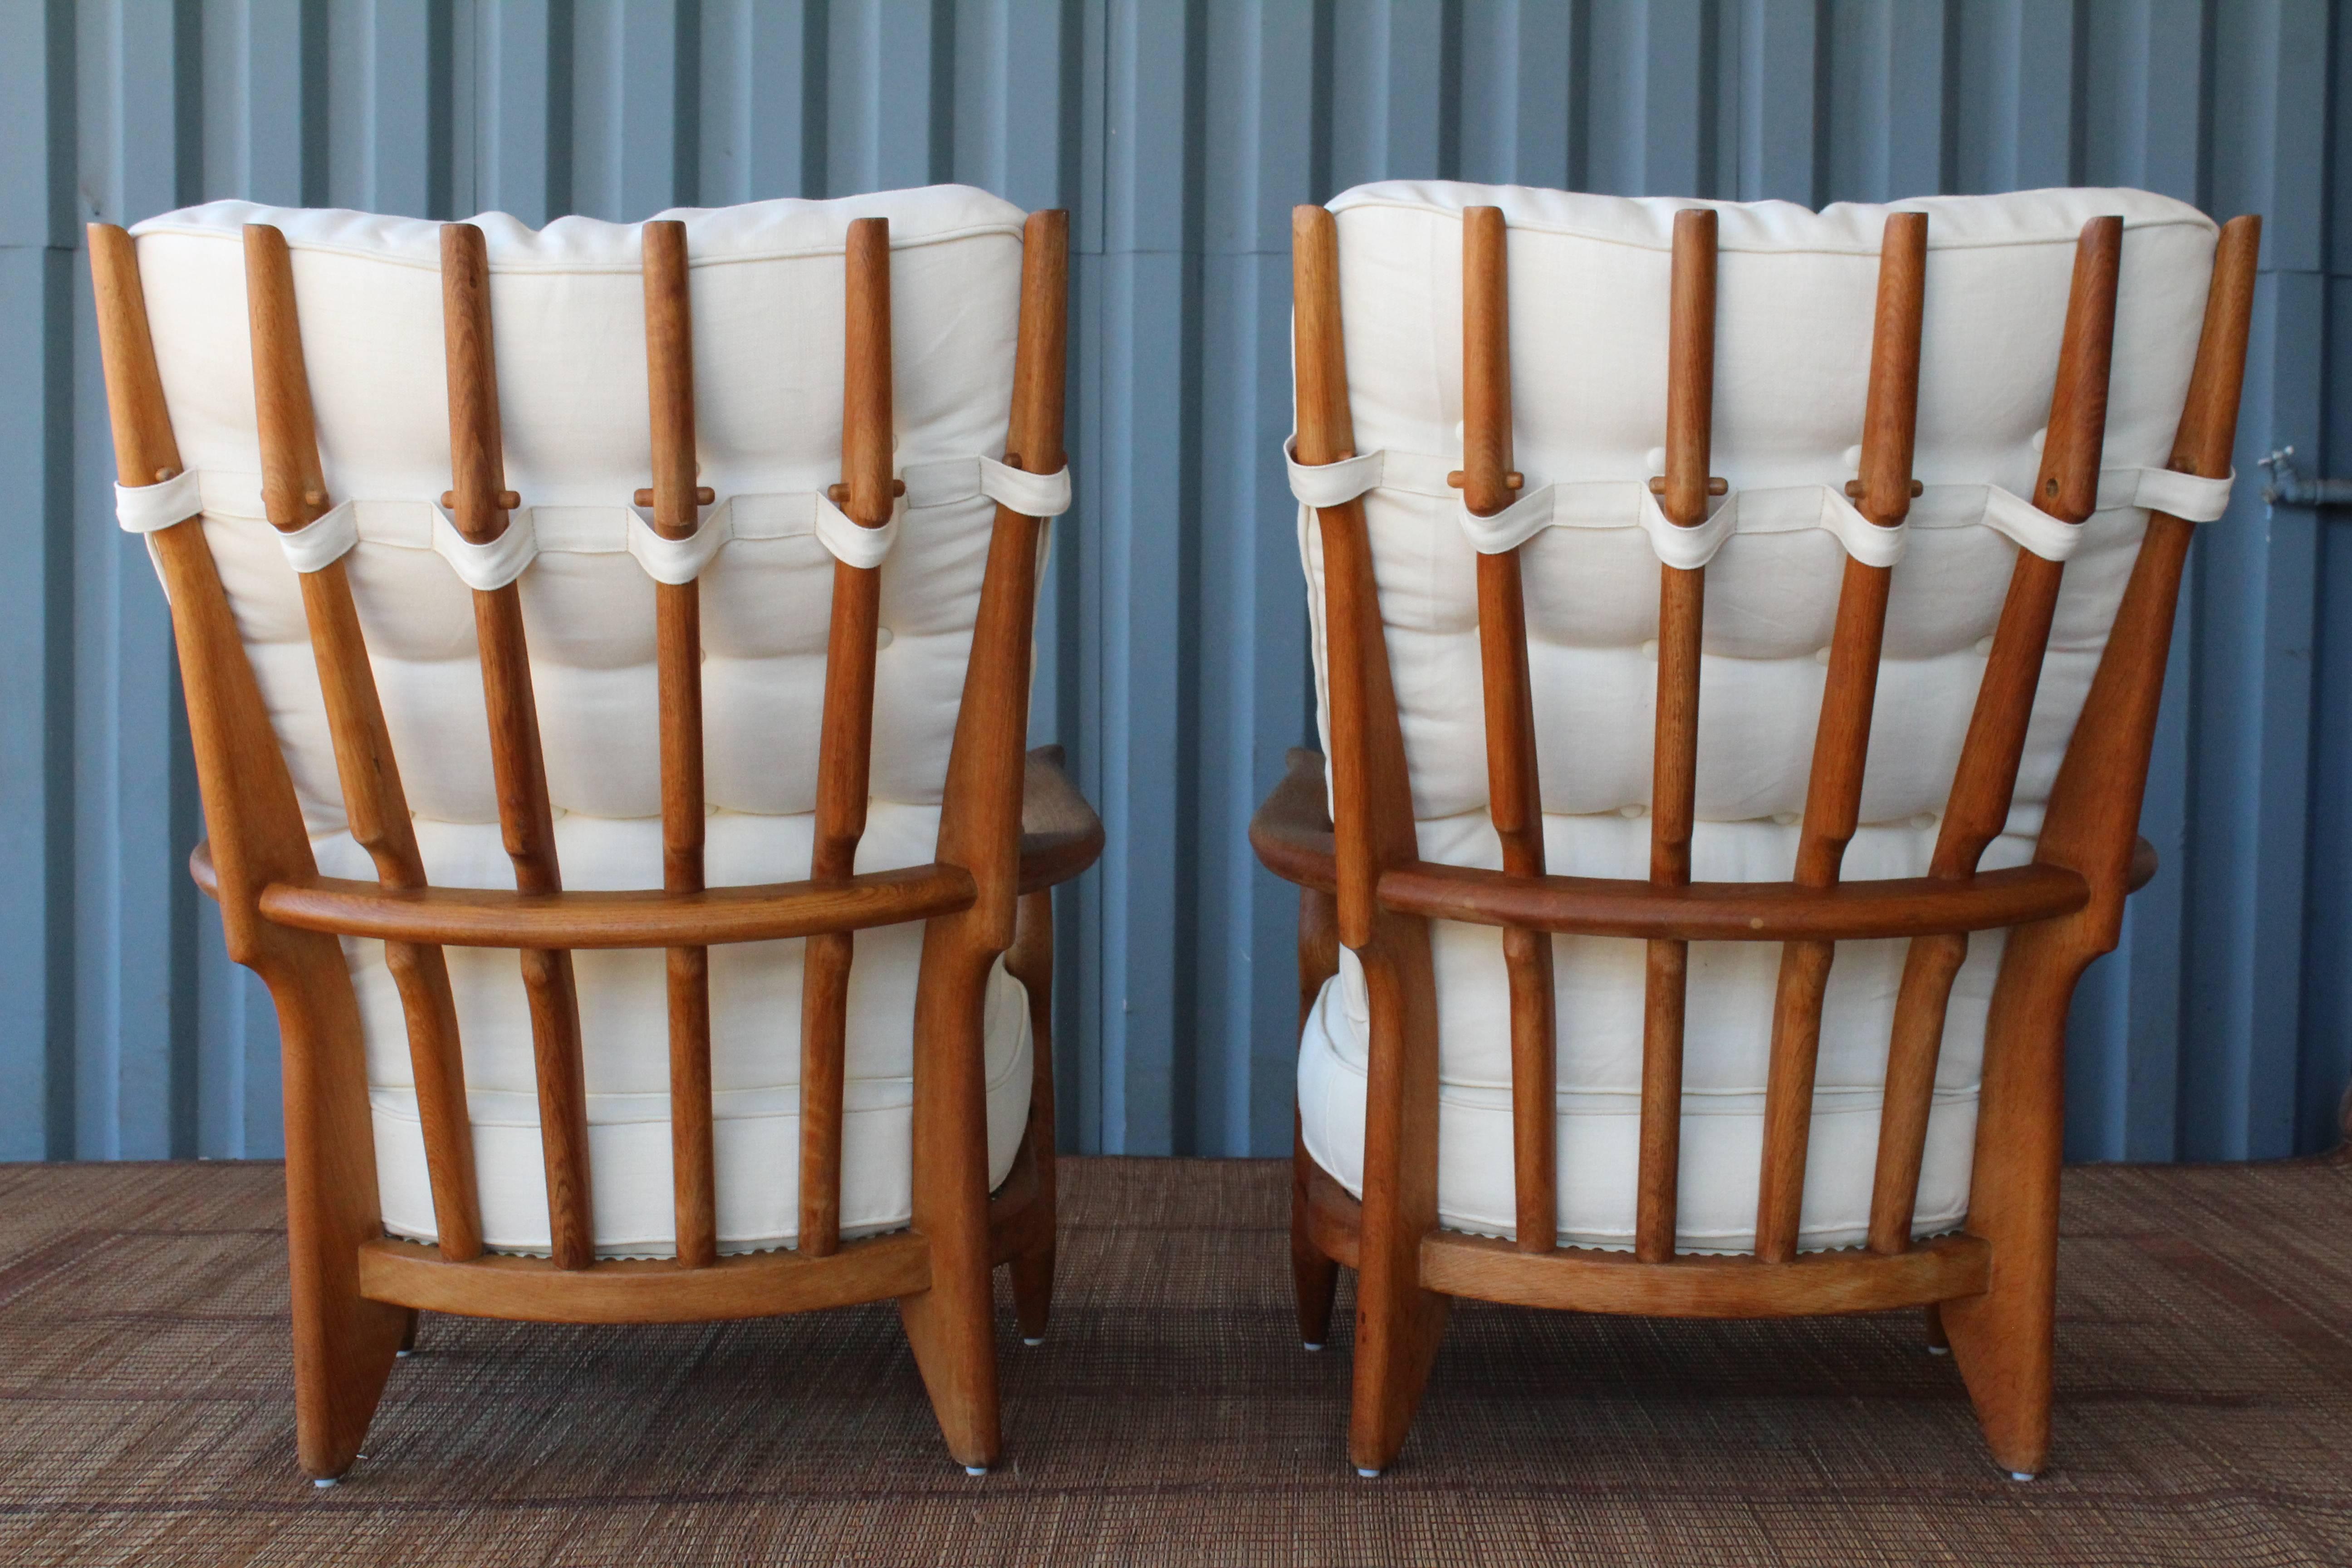 Stunning pair of 'Grand Repos' armchairs designed by Guillerme et Chambron for Votre Maison, France, 1960s. The pair are crafted in solid oak and feature new upholstery in an off white French hemp linen.